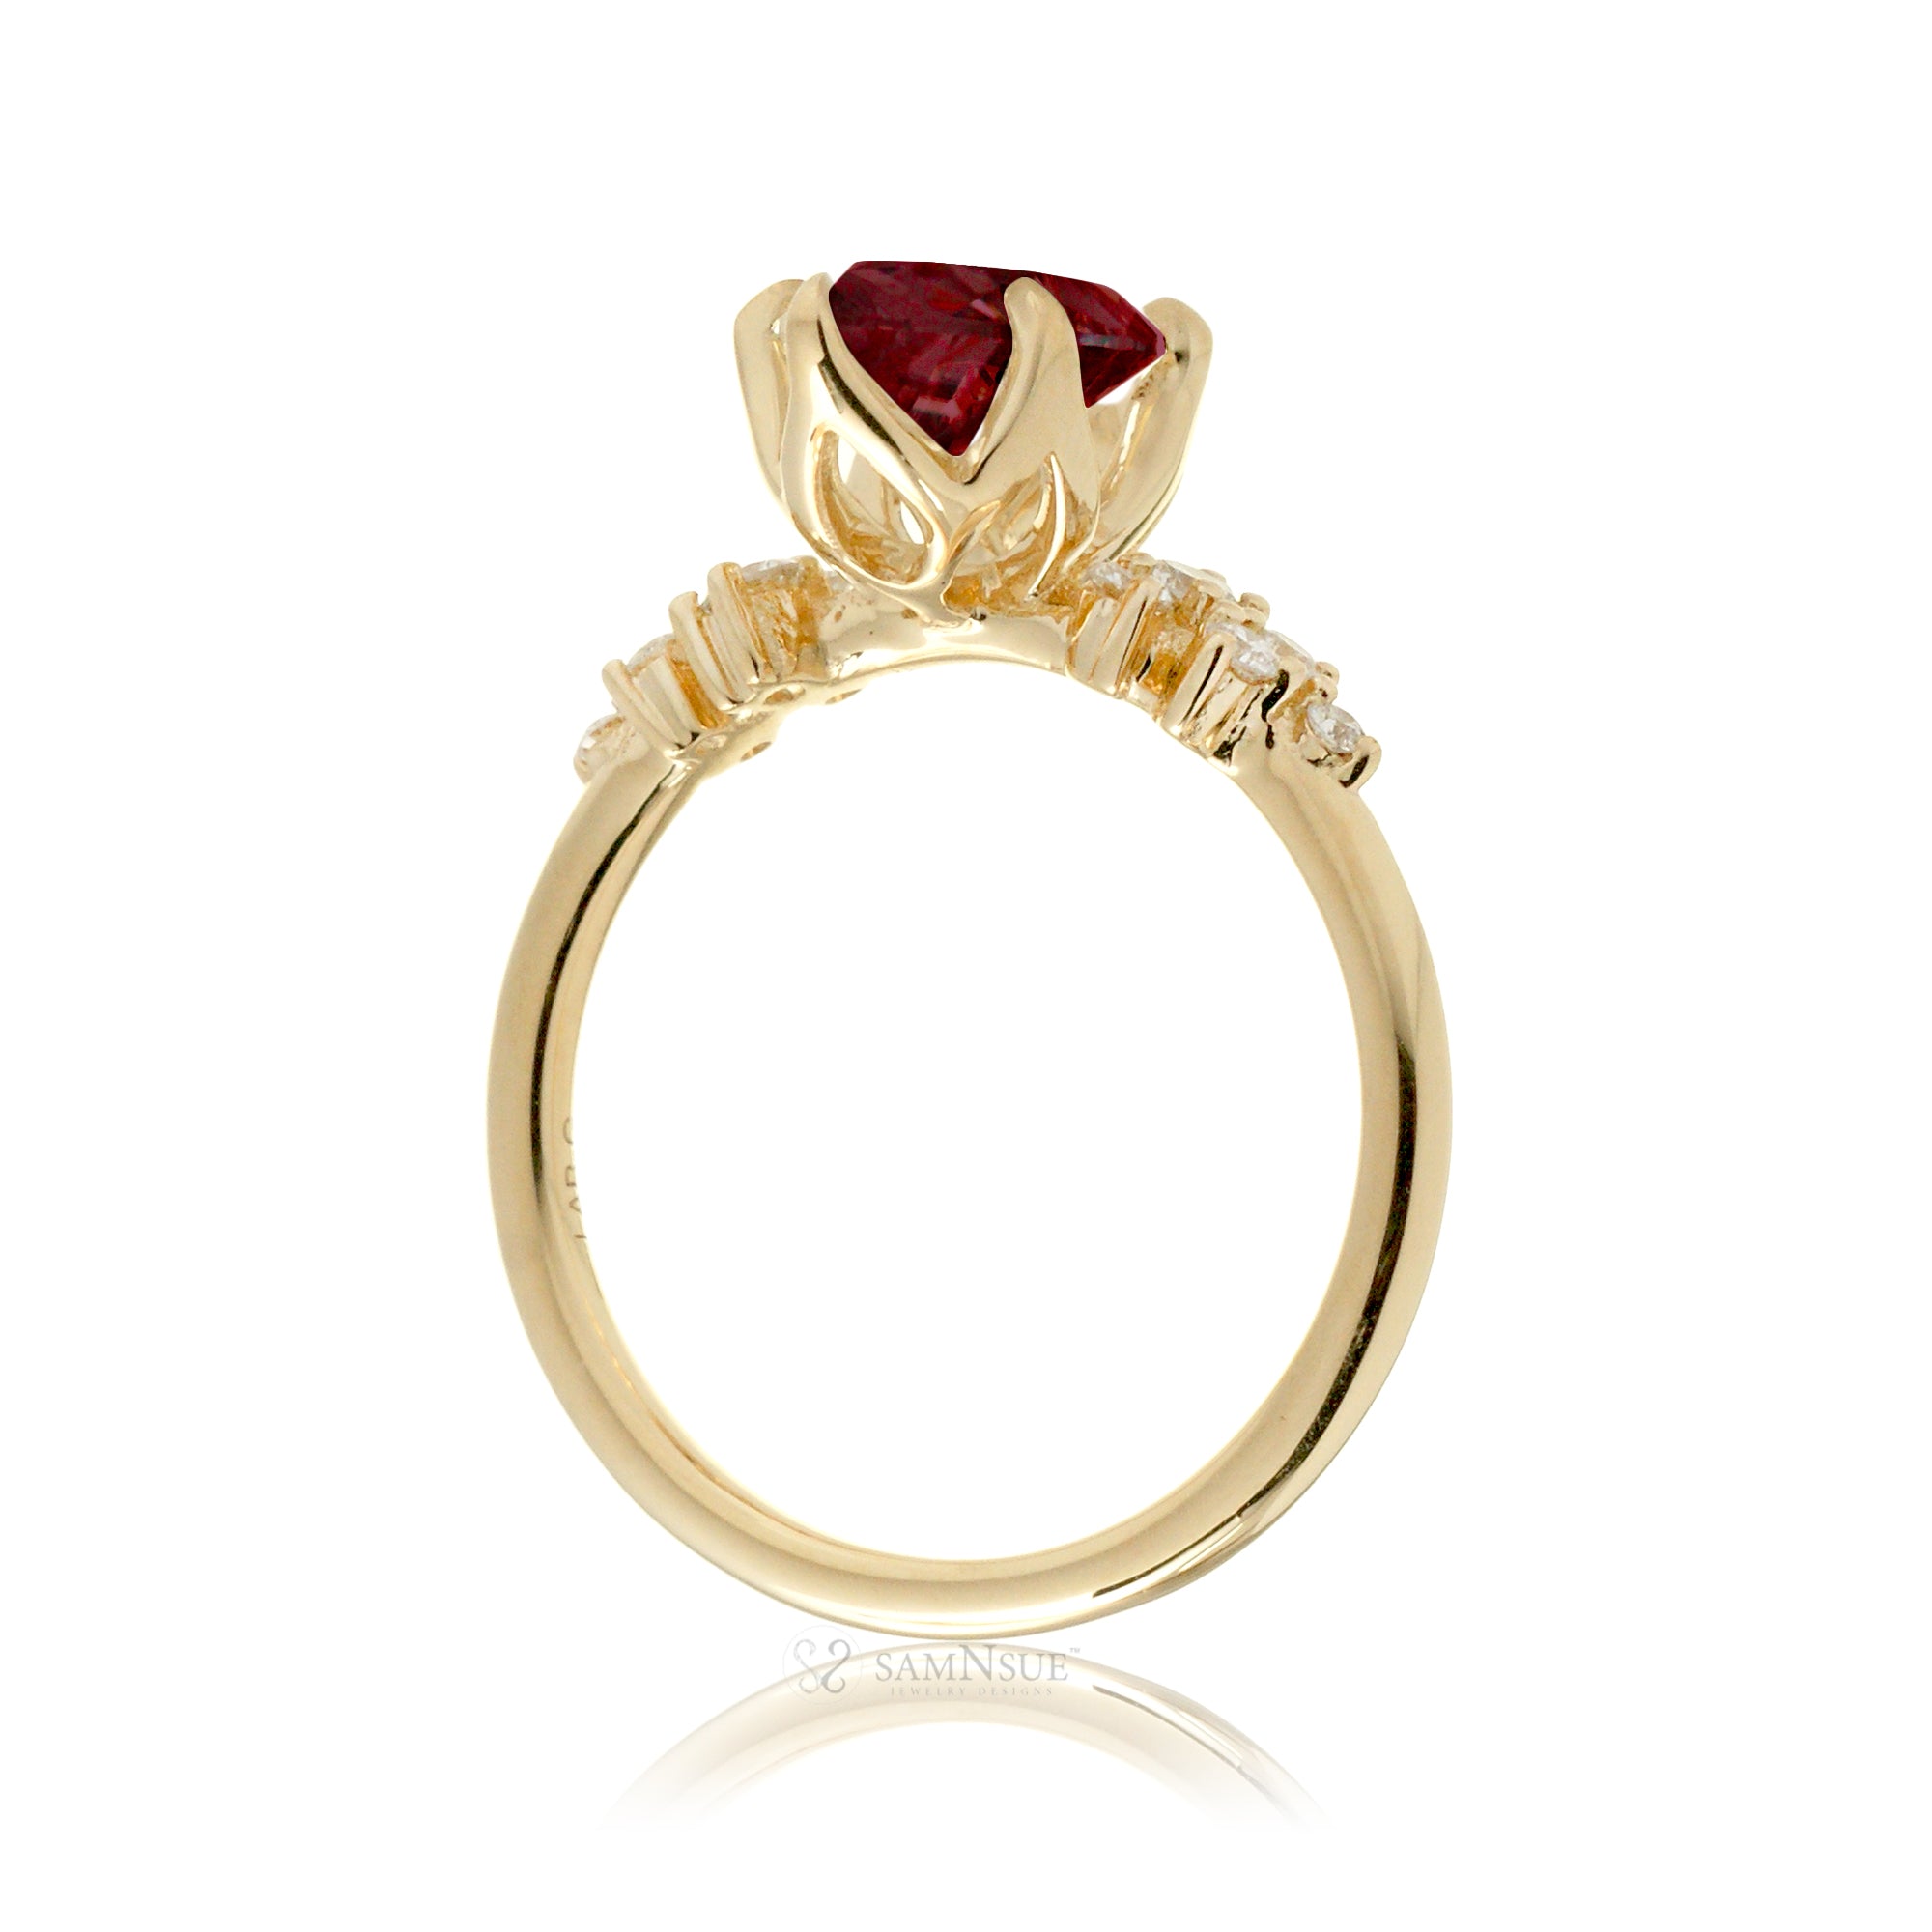 Marquise ruby and diamond solitaire engagement ring in yellow gold